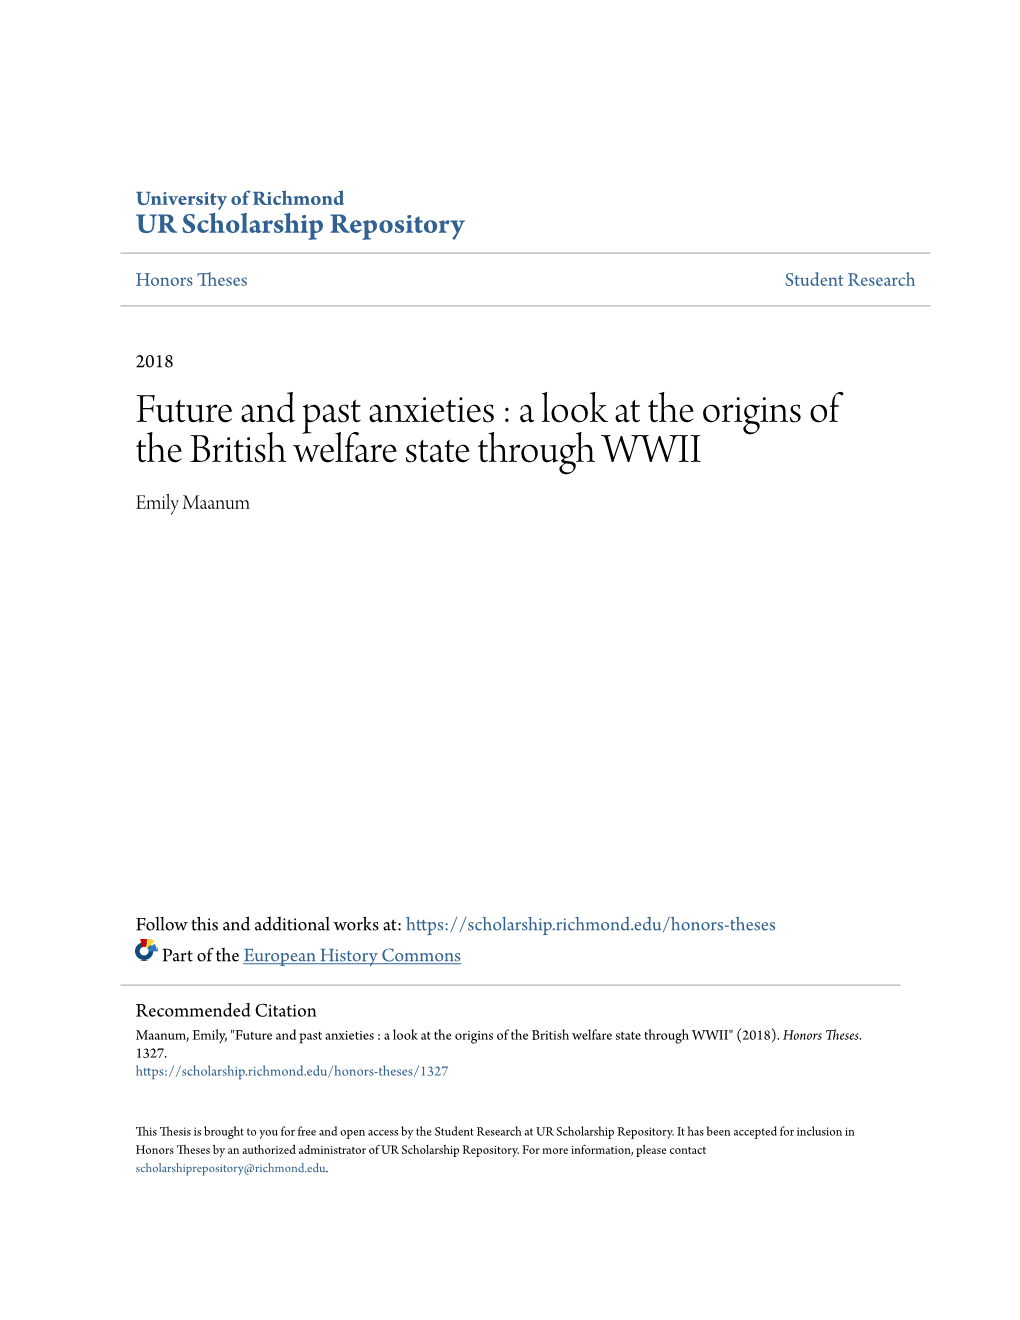 A Look at the Origins of the British Welfare State Through WWII Emily Maanum